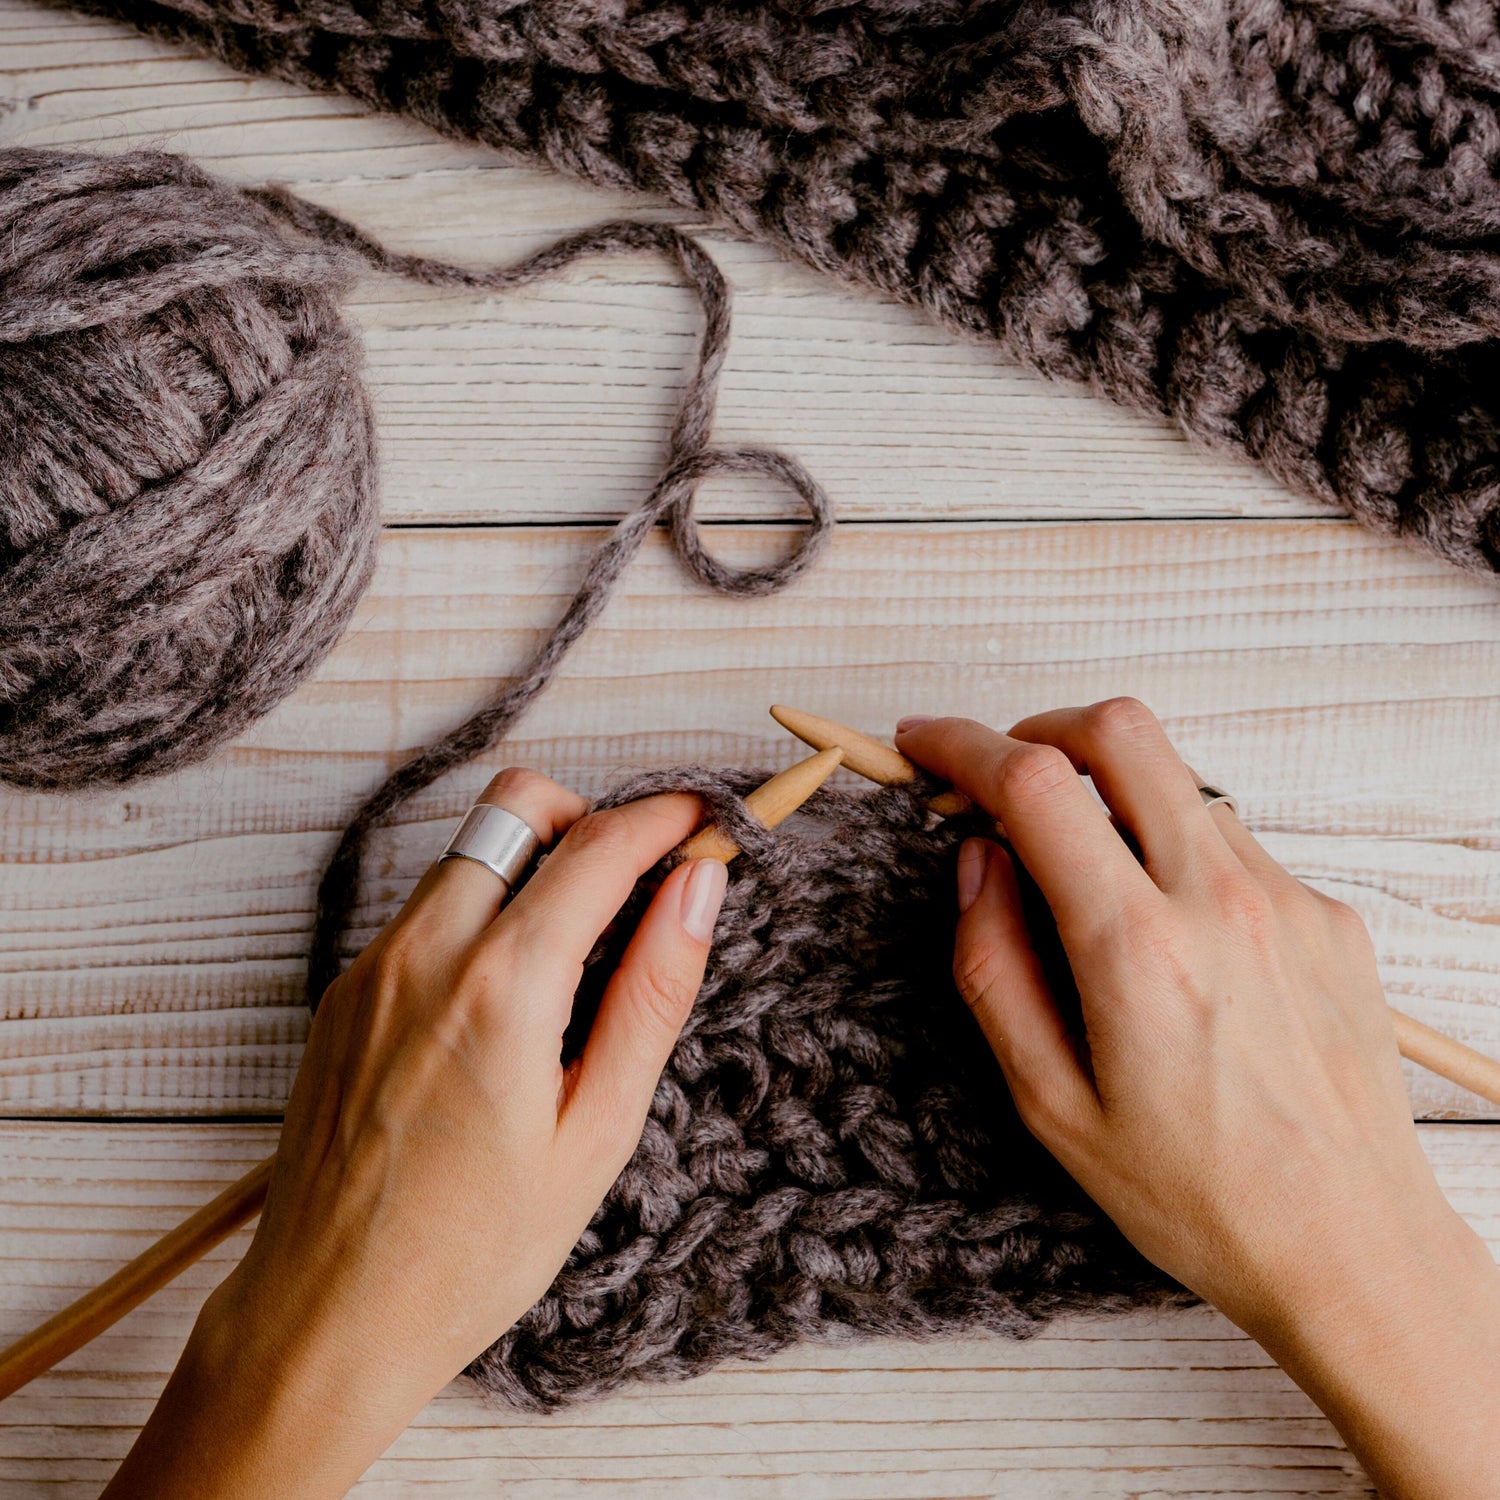  Online Knitting Store. Yarns, Projects, Patterns, Books,  Accessories, and Tools.